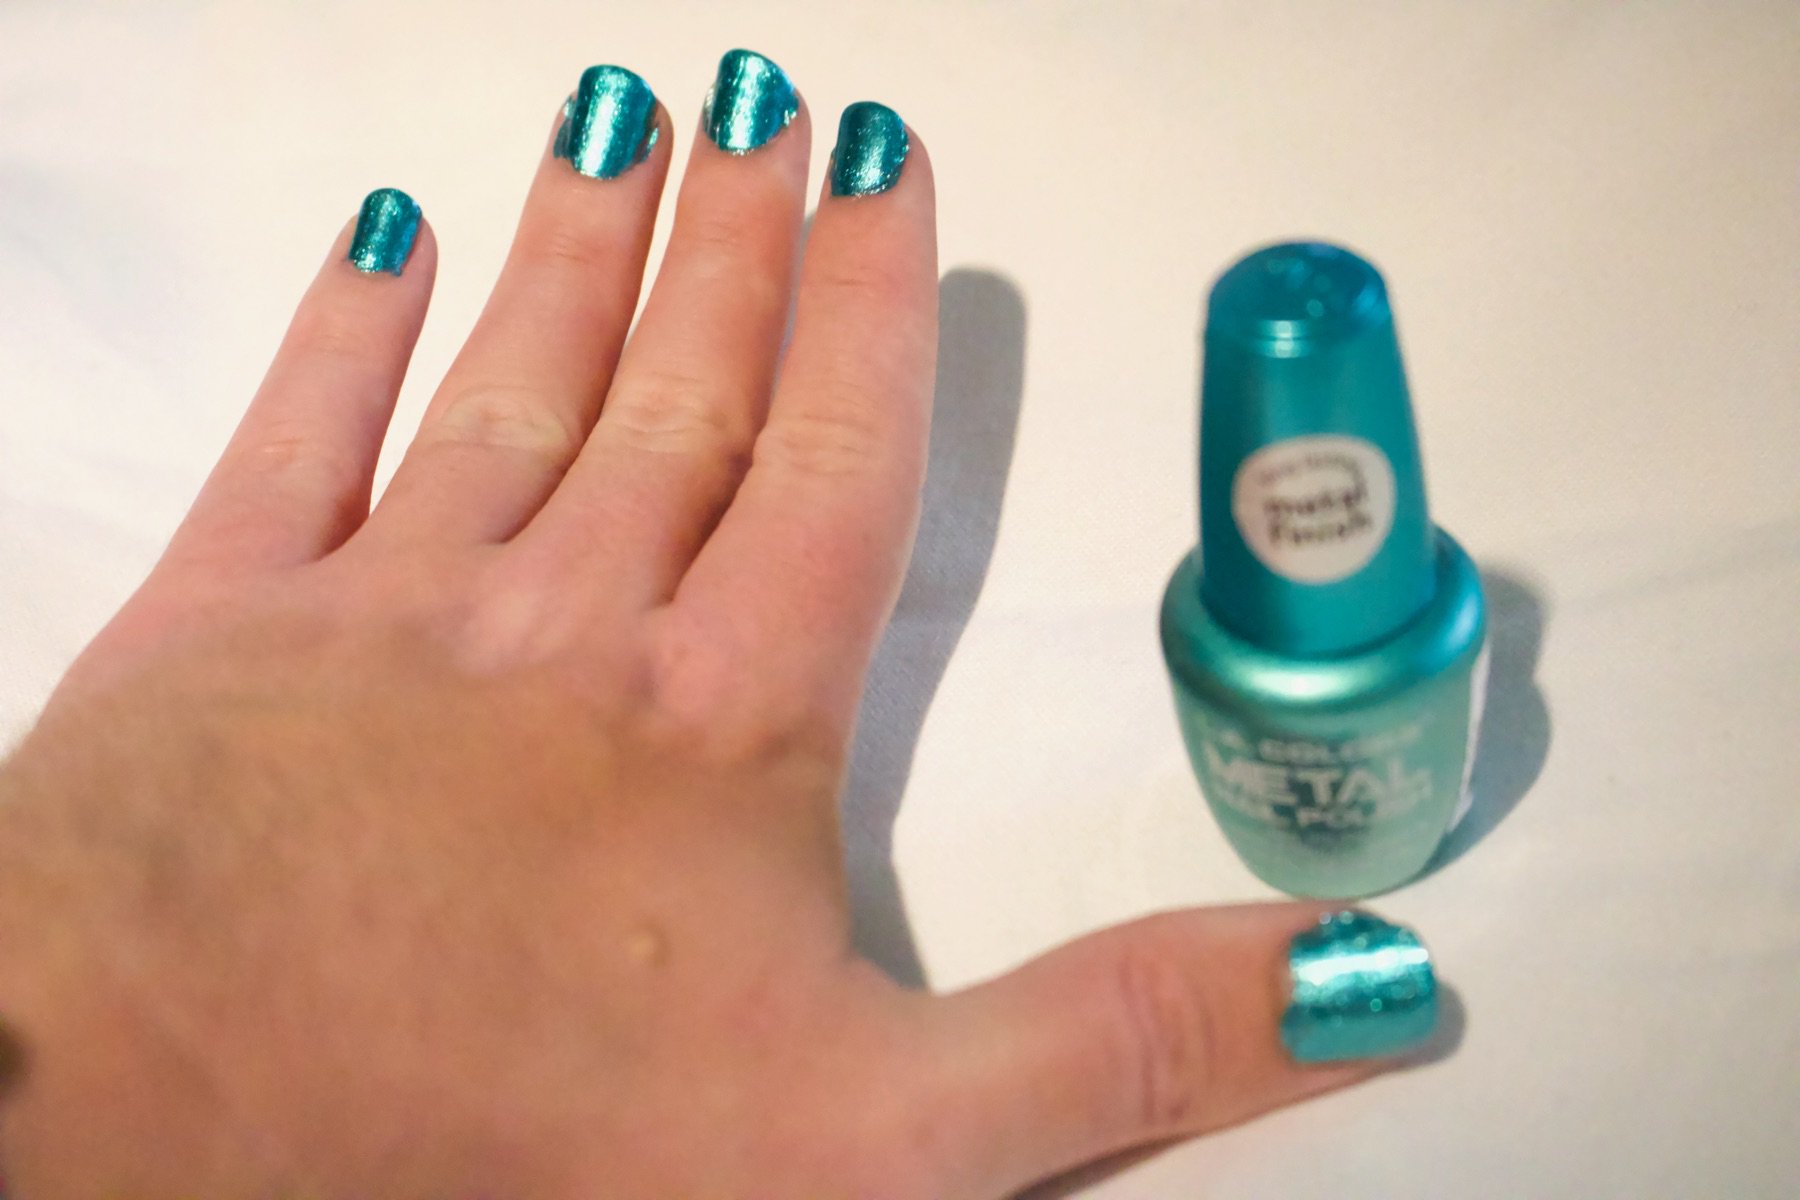 A teal metallic polish by L.A. Colors.